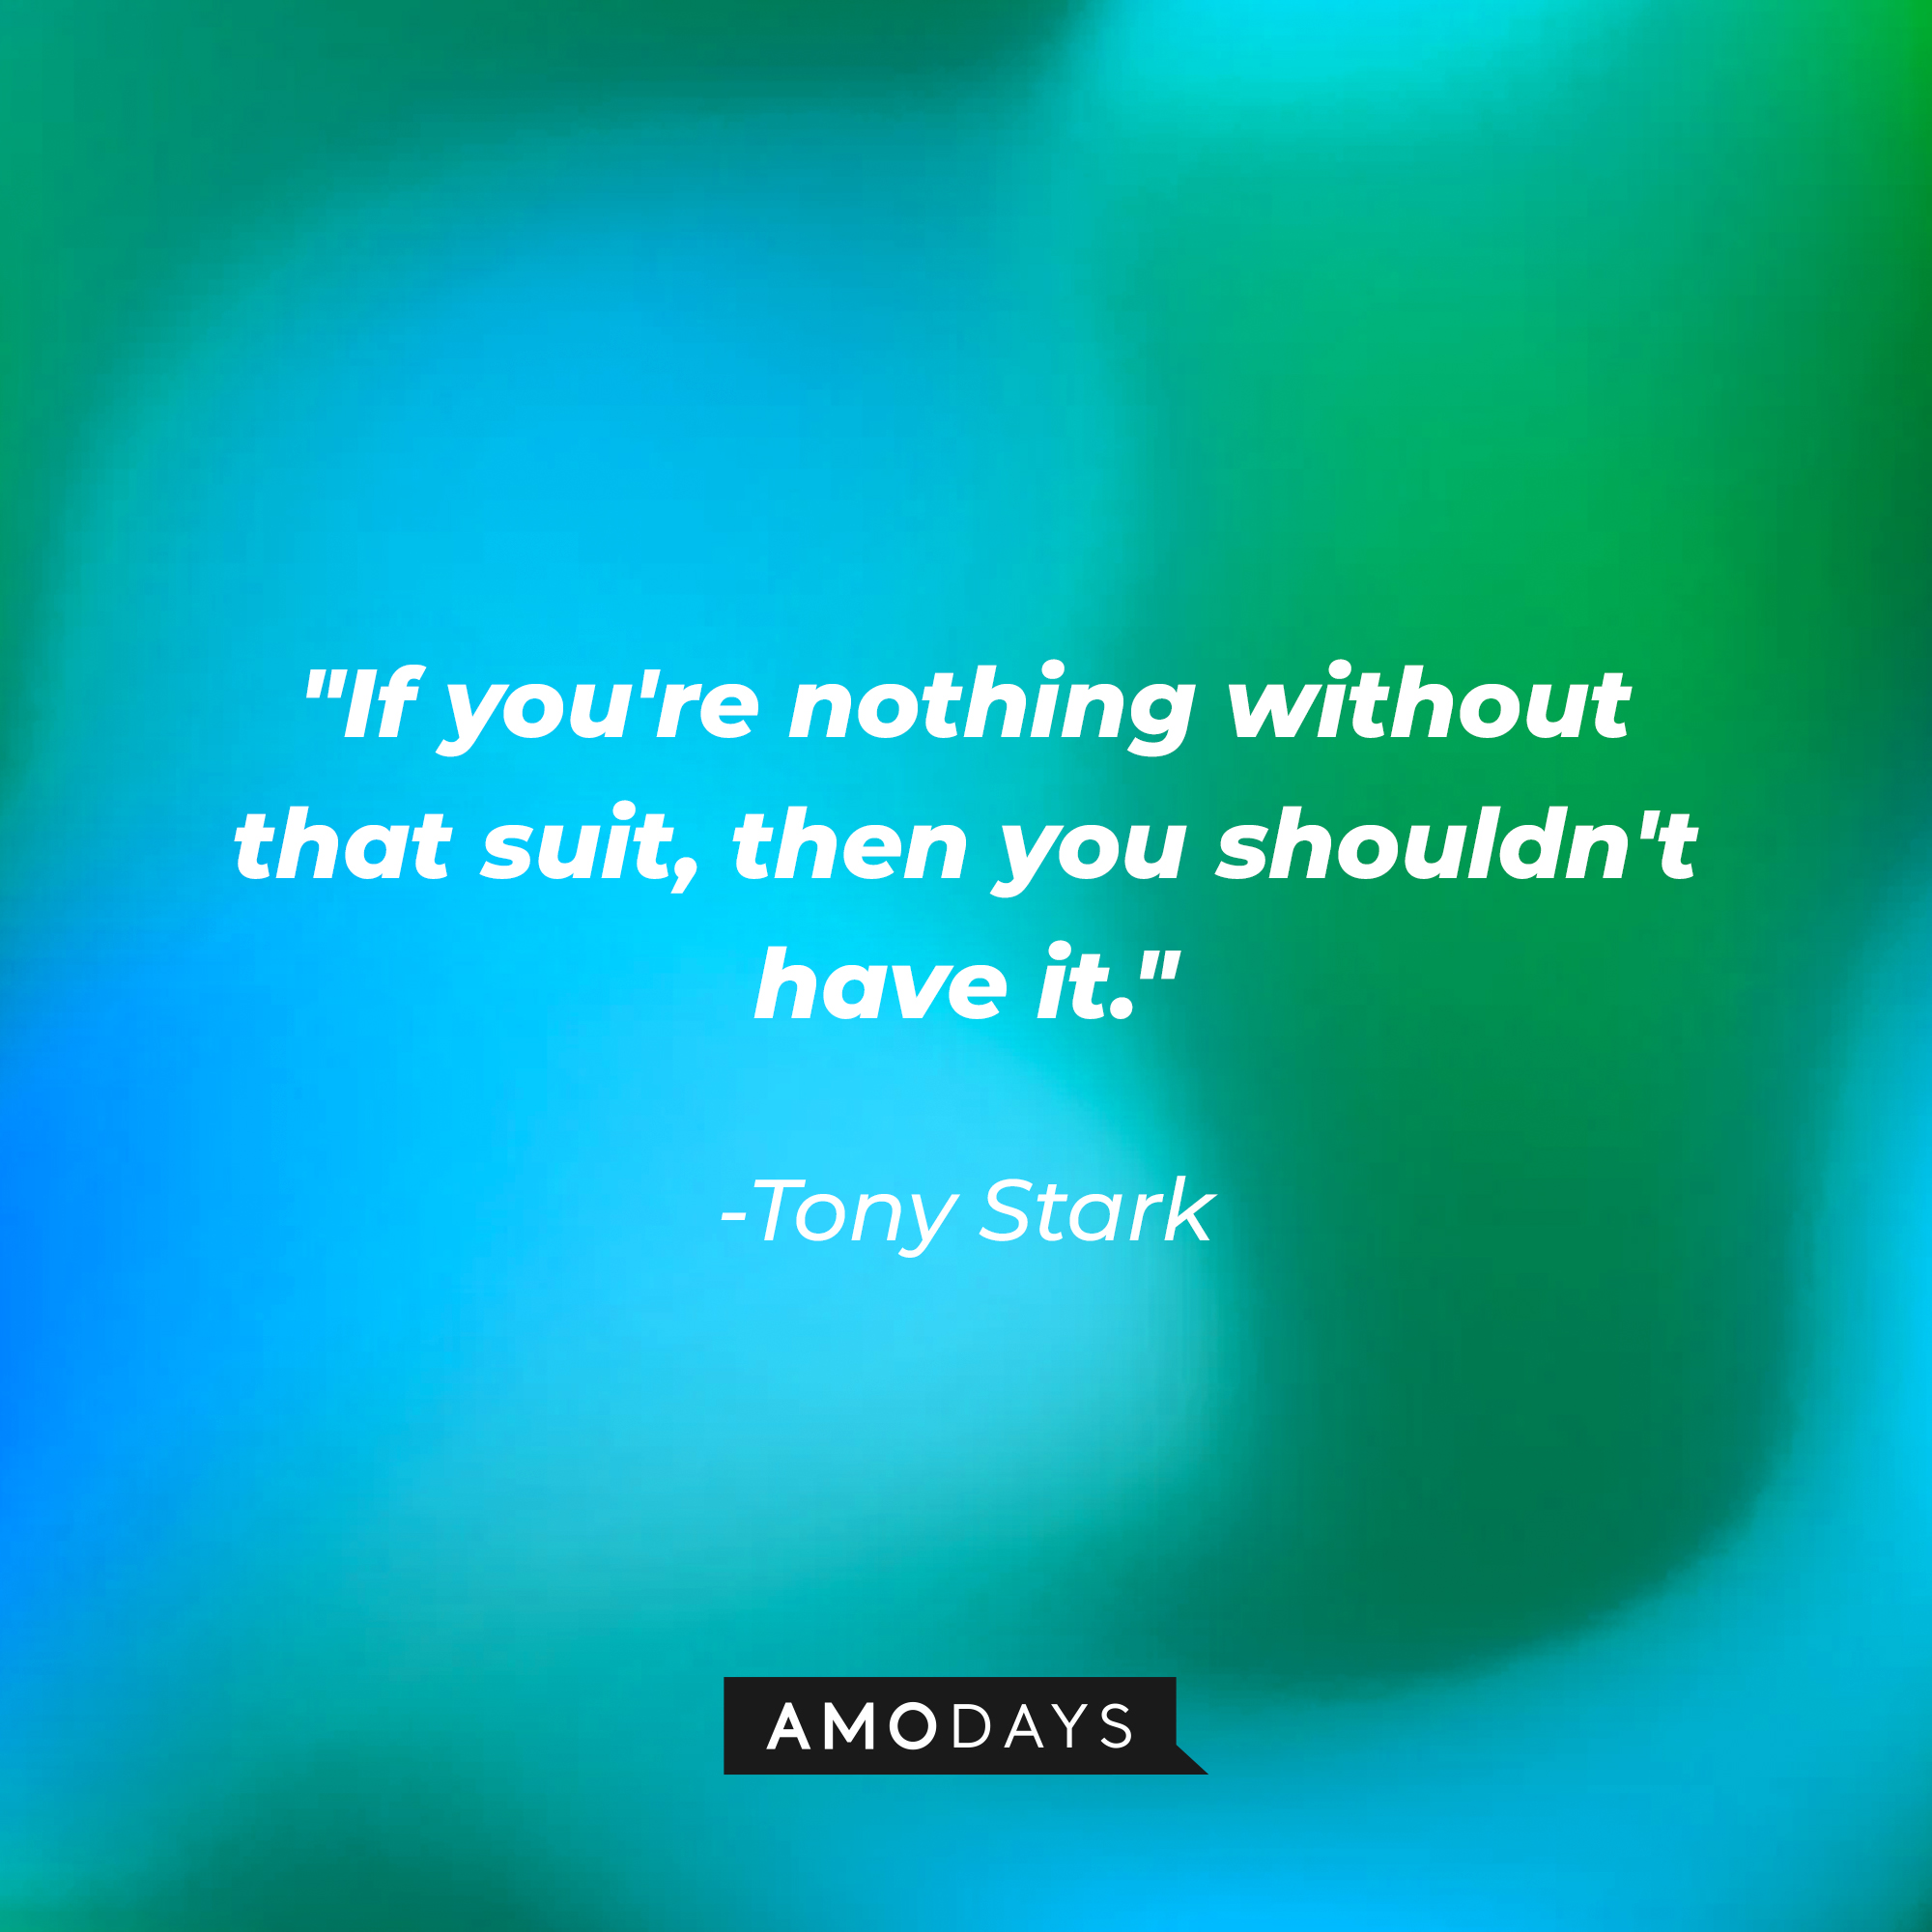 Tony Stark’s quote: "If you're nothing without that suit, then you shouldn't have it." | Image AmoDays